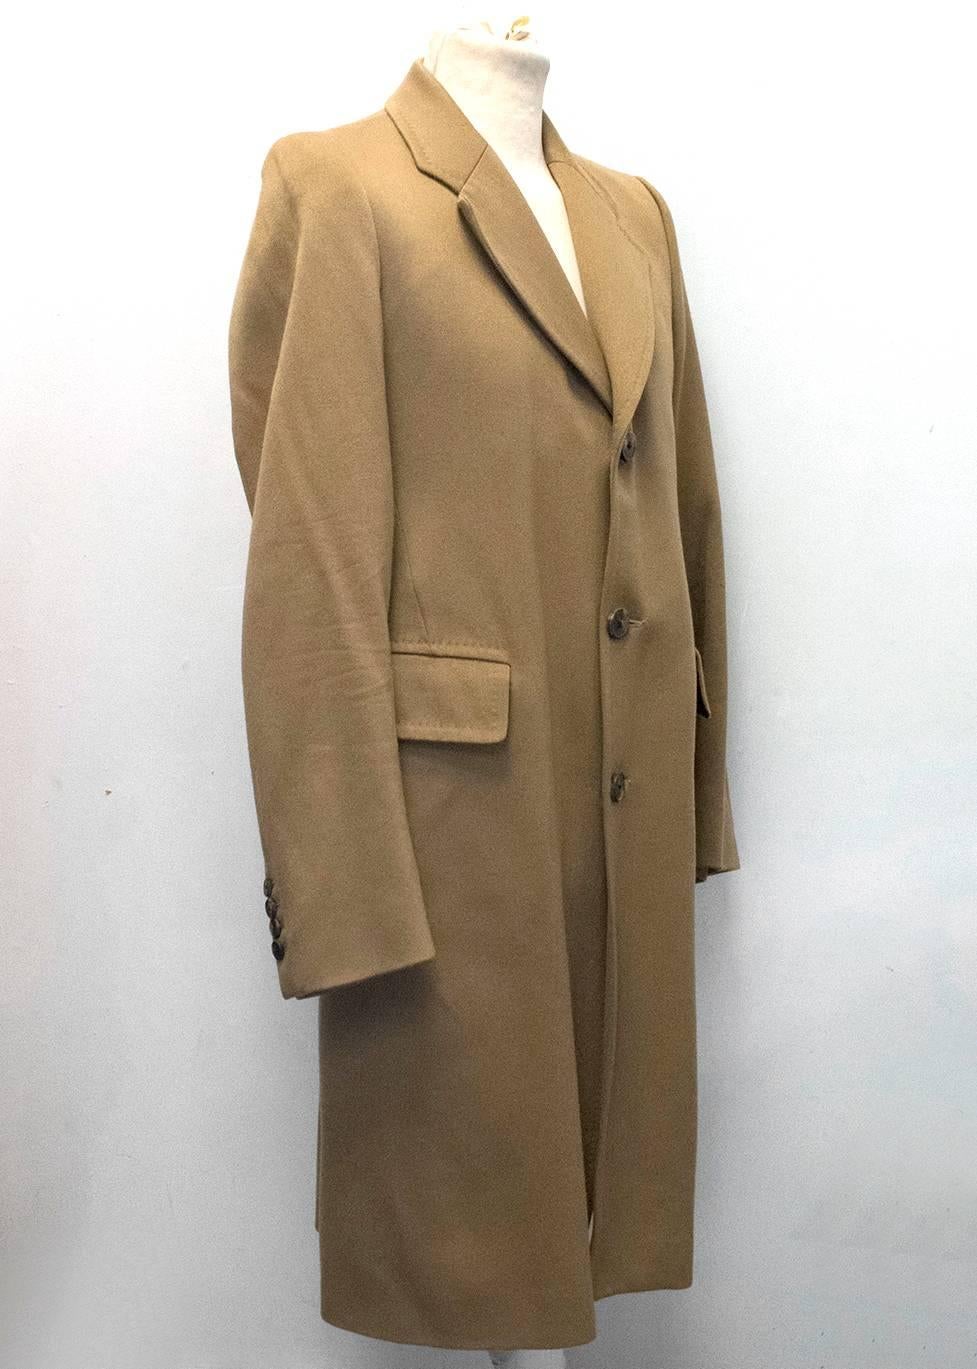 Dries Van Noten camel single breasted coat with 3 buttons up the front and a black silk blend lining. Features 2 large front pockets and 2 inside pockets, a notch lapel and a single vent in the back.

Condition 10/10 

Size EU: 46
Size UK: